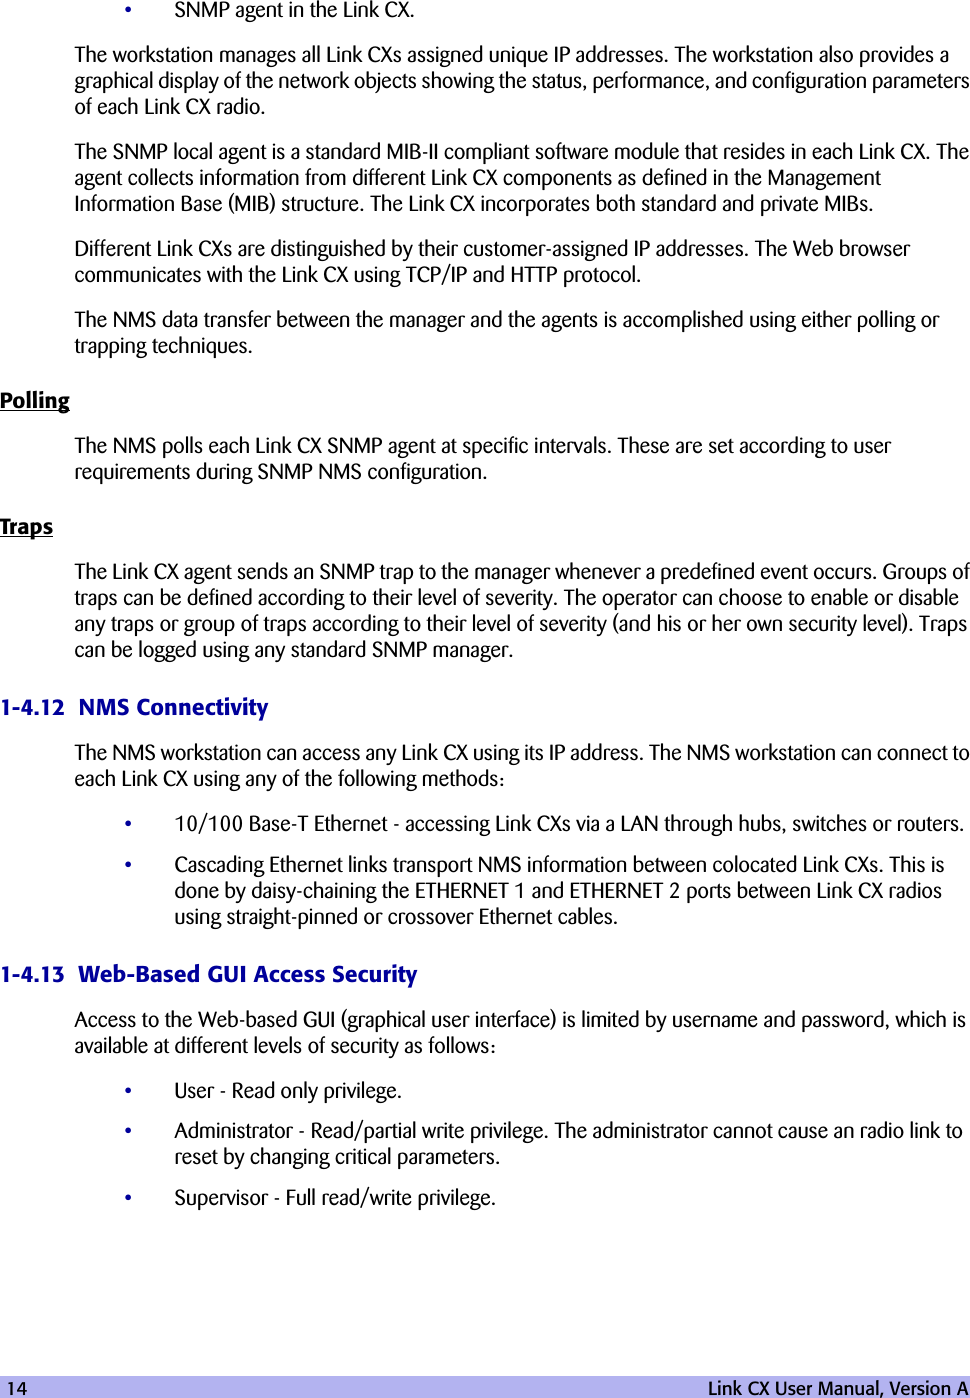 14   Link CX User Manual, Version A•SNMP agent in the Link CX.The workstation manages all Link CXs assigned unique IP addresses. The workstation also provides a graphical display of the network objects showing the status, performance, and configuration parameters of each Link CX radio. The SNMP local agent is a standard MIB-II compliant software module that resides in each Link CX. The agent collects information from different Link CX components as defined in the Management Information Base (MIB) structure. The Link CX incorporates both standard and private MIBs.Different Link CXs are distinguished by their customer-assigned IP addresses. The Web browser communicates with the Link CX using TCP/IP and HTTP protocol.The NMS data transfer between the manager and the agents is accomplished using either polling or trapping techniques.PollingThe NMS polls each Link CX SNMP agent at specific intervals. These are set according to user requirements during SNMP NMS configuration. TrapsThe Link CX agent sends an SNMP trap to the manager whenever a predefined event occurs. Groups of traps can be defined according to their level of severity. The operator can choose to enable or disable any traps or group of traps according to their level of severity (and his or her own security level). Traps can be logged using any standard SNMP manager.1-4.12  NMS ConnectivityThe NMS workstation can access any Link CX using its IP address. The NMS workstation can connect to each Link CX using any of the following methods:•10/100 Base-T Ethernet - accessing Link CXs via a LAN through hubs, switches or routers. •Cascading Ethernet links transport NMS information between colocated Link CXs. This is done by daisy-chaining the ETHERNET 1 and ETHERNET 2 ports between Link CX radios using straight-pinned or crossover Ethernet cables.1-4.13  Web-Based GUI Access SecurityAccess to the Web-based GUI (graphical user interface) is limited by username and password, which is available at different levels of security as follows:•User - Read only privilege.•Administrator - Read/partial write privilege. The administrator cannot cause an radio link to reset by changing critical parameters.•Supervisor - Full read/write privilege.